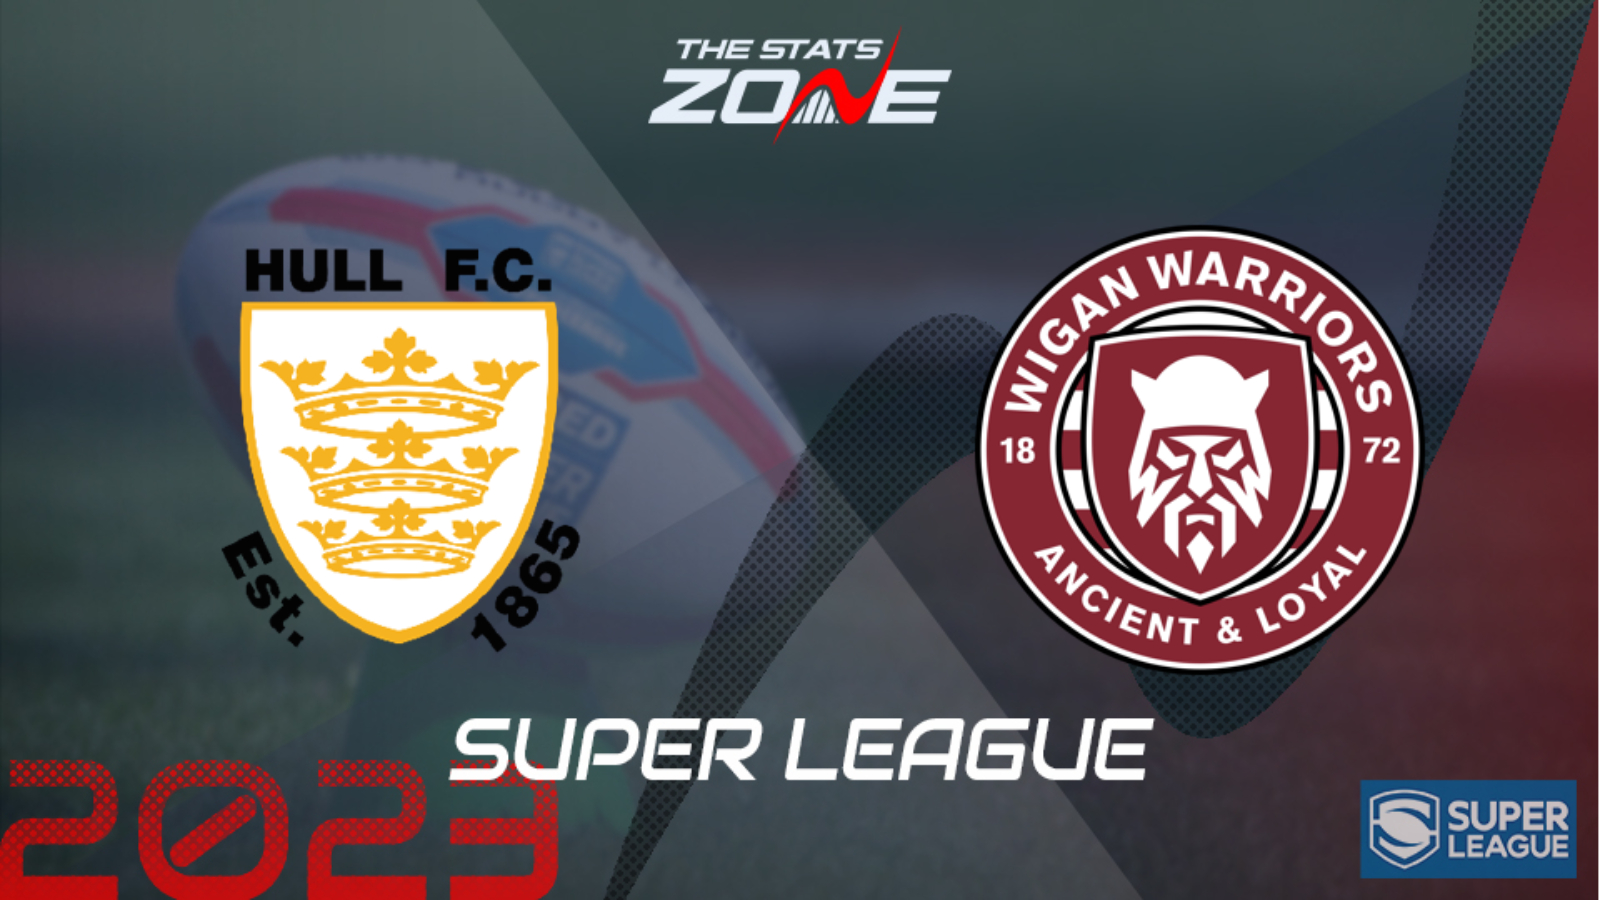 Hull Fc Vs Wigan Warriors League Stage Preview And Prediction 2023 Super League The Stats Zone